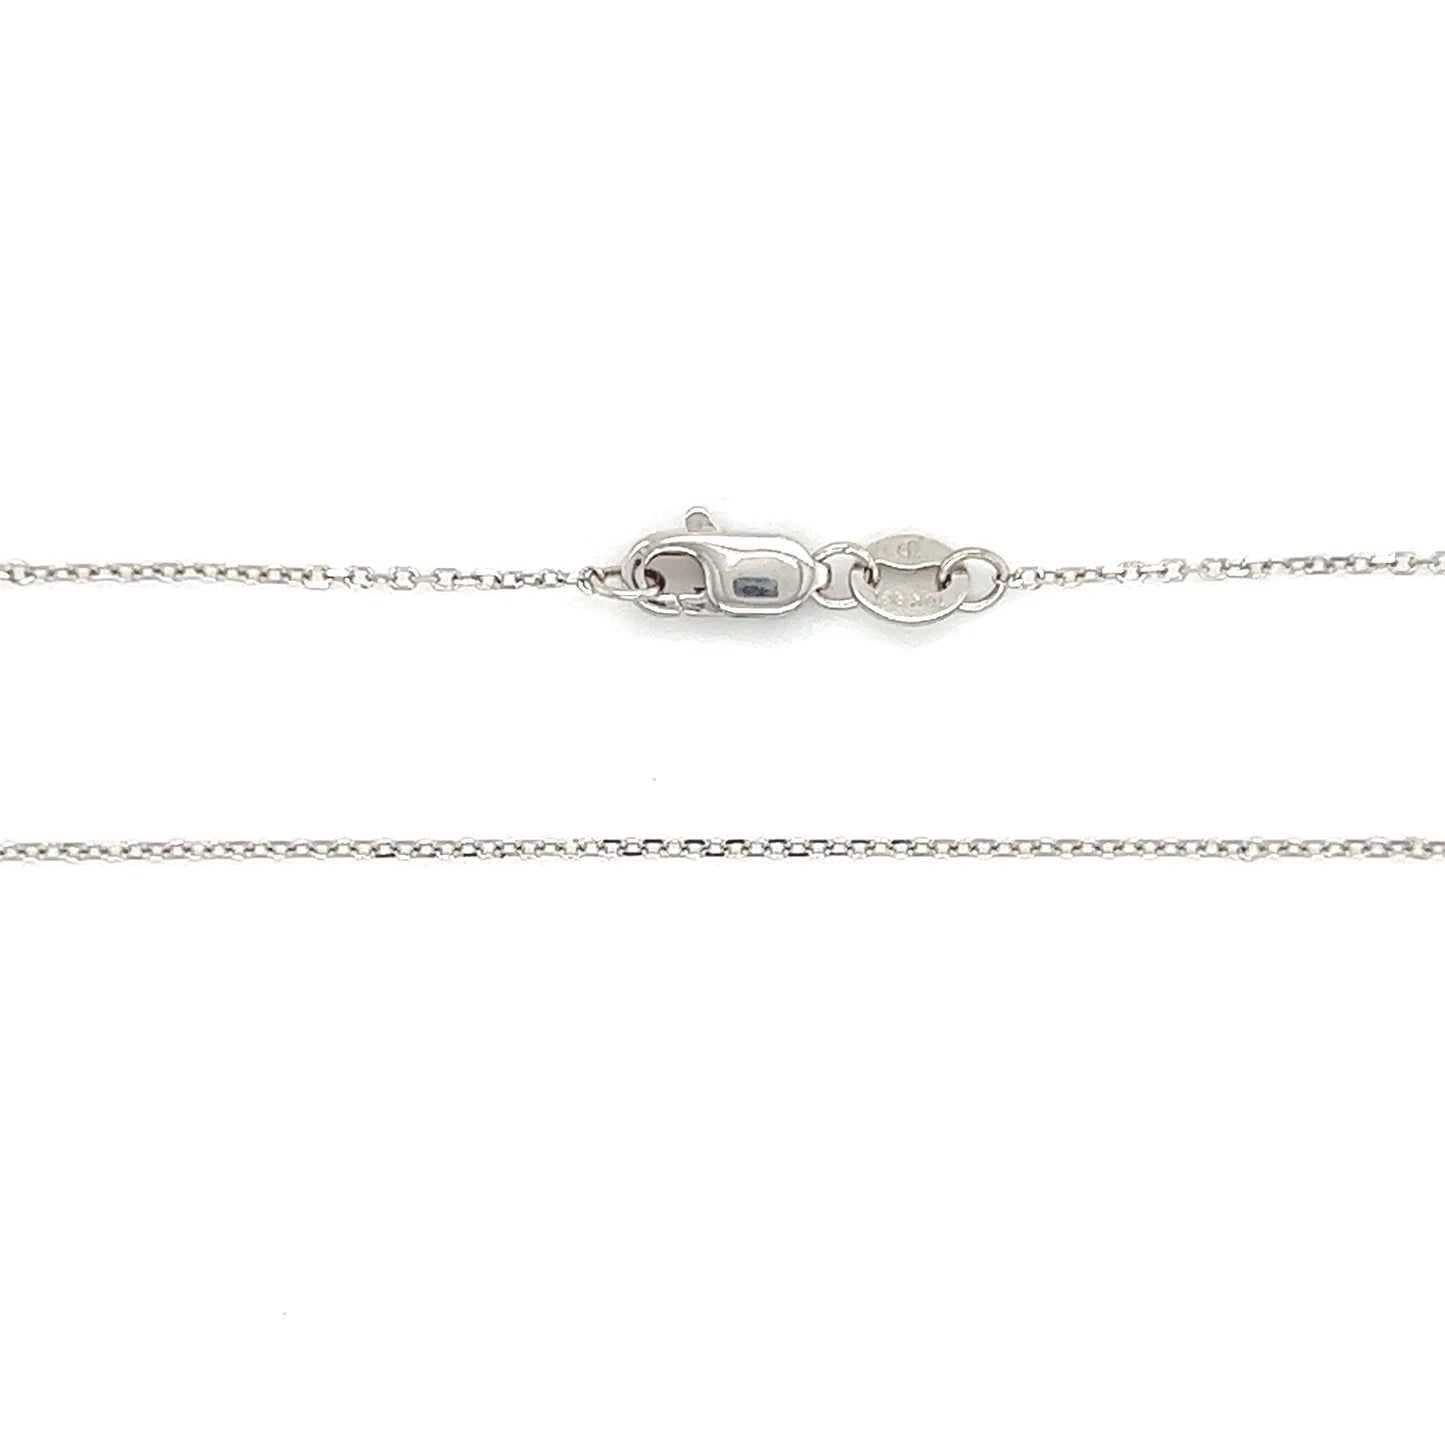 Cable Chain 0.5mm with 16in Length in 10K White Gold Chain and Clasp View